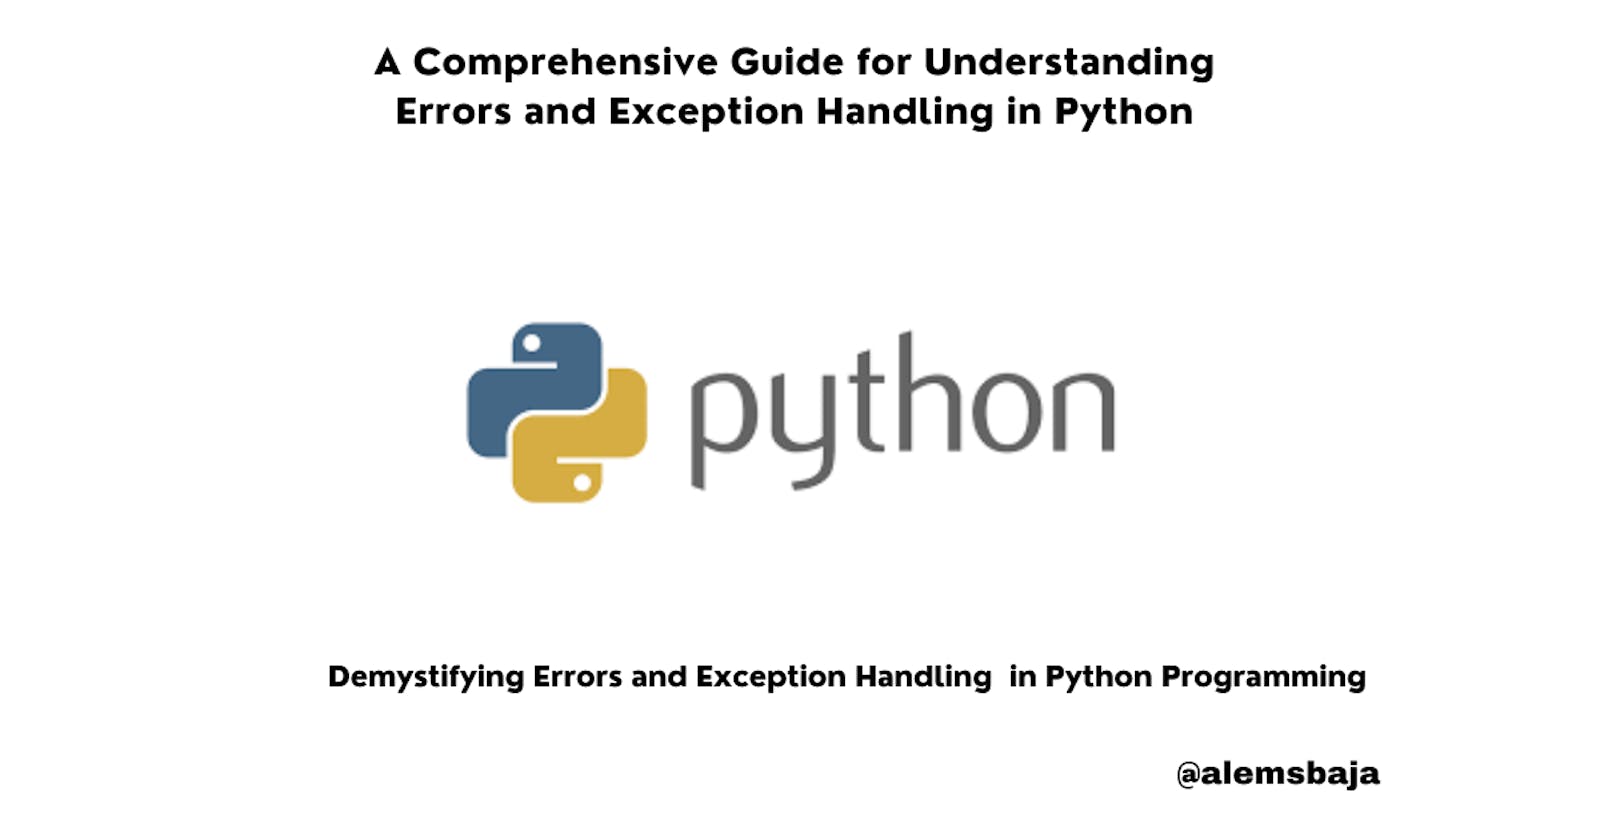 A Comprehensive Guide for Understanding Errors and Exception Handling in Python